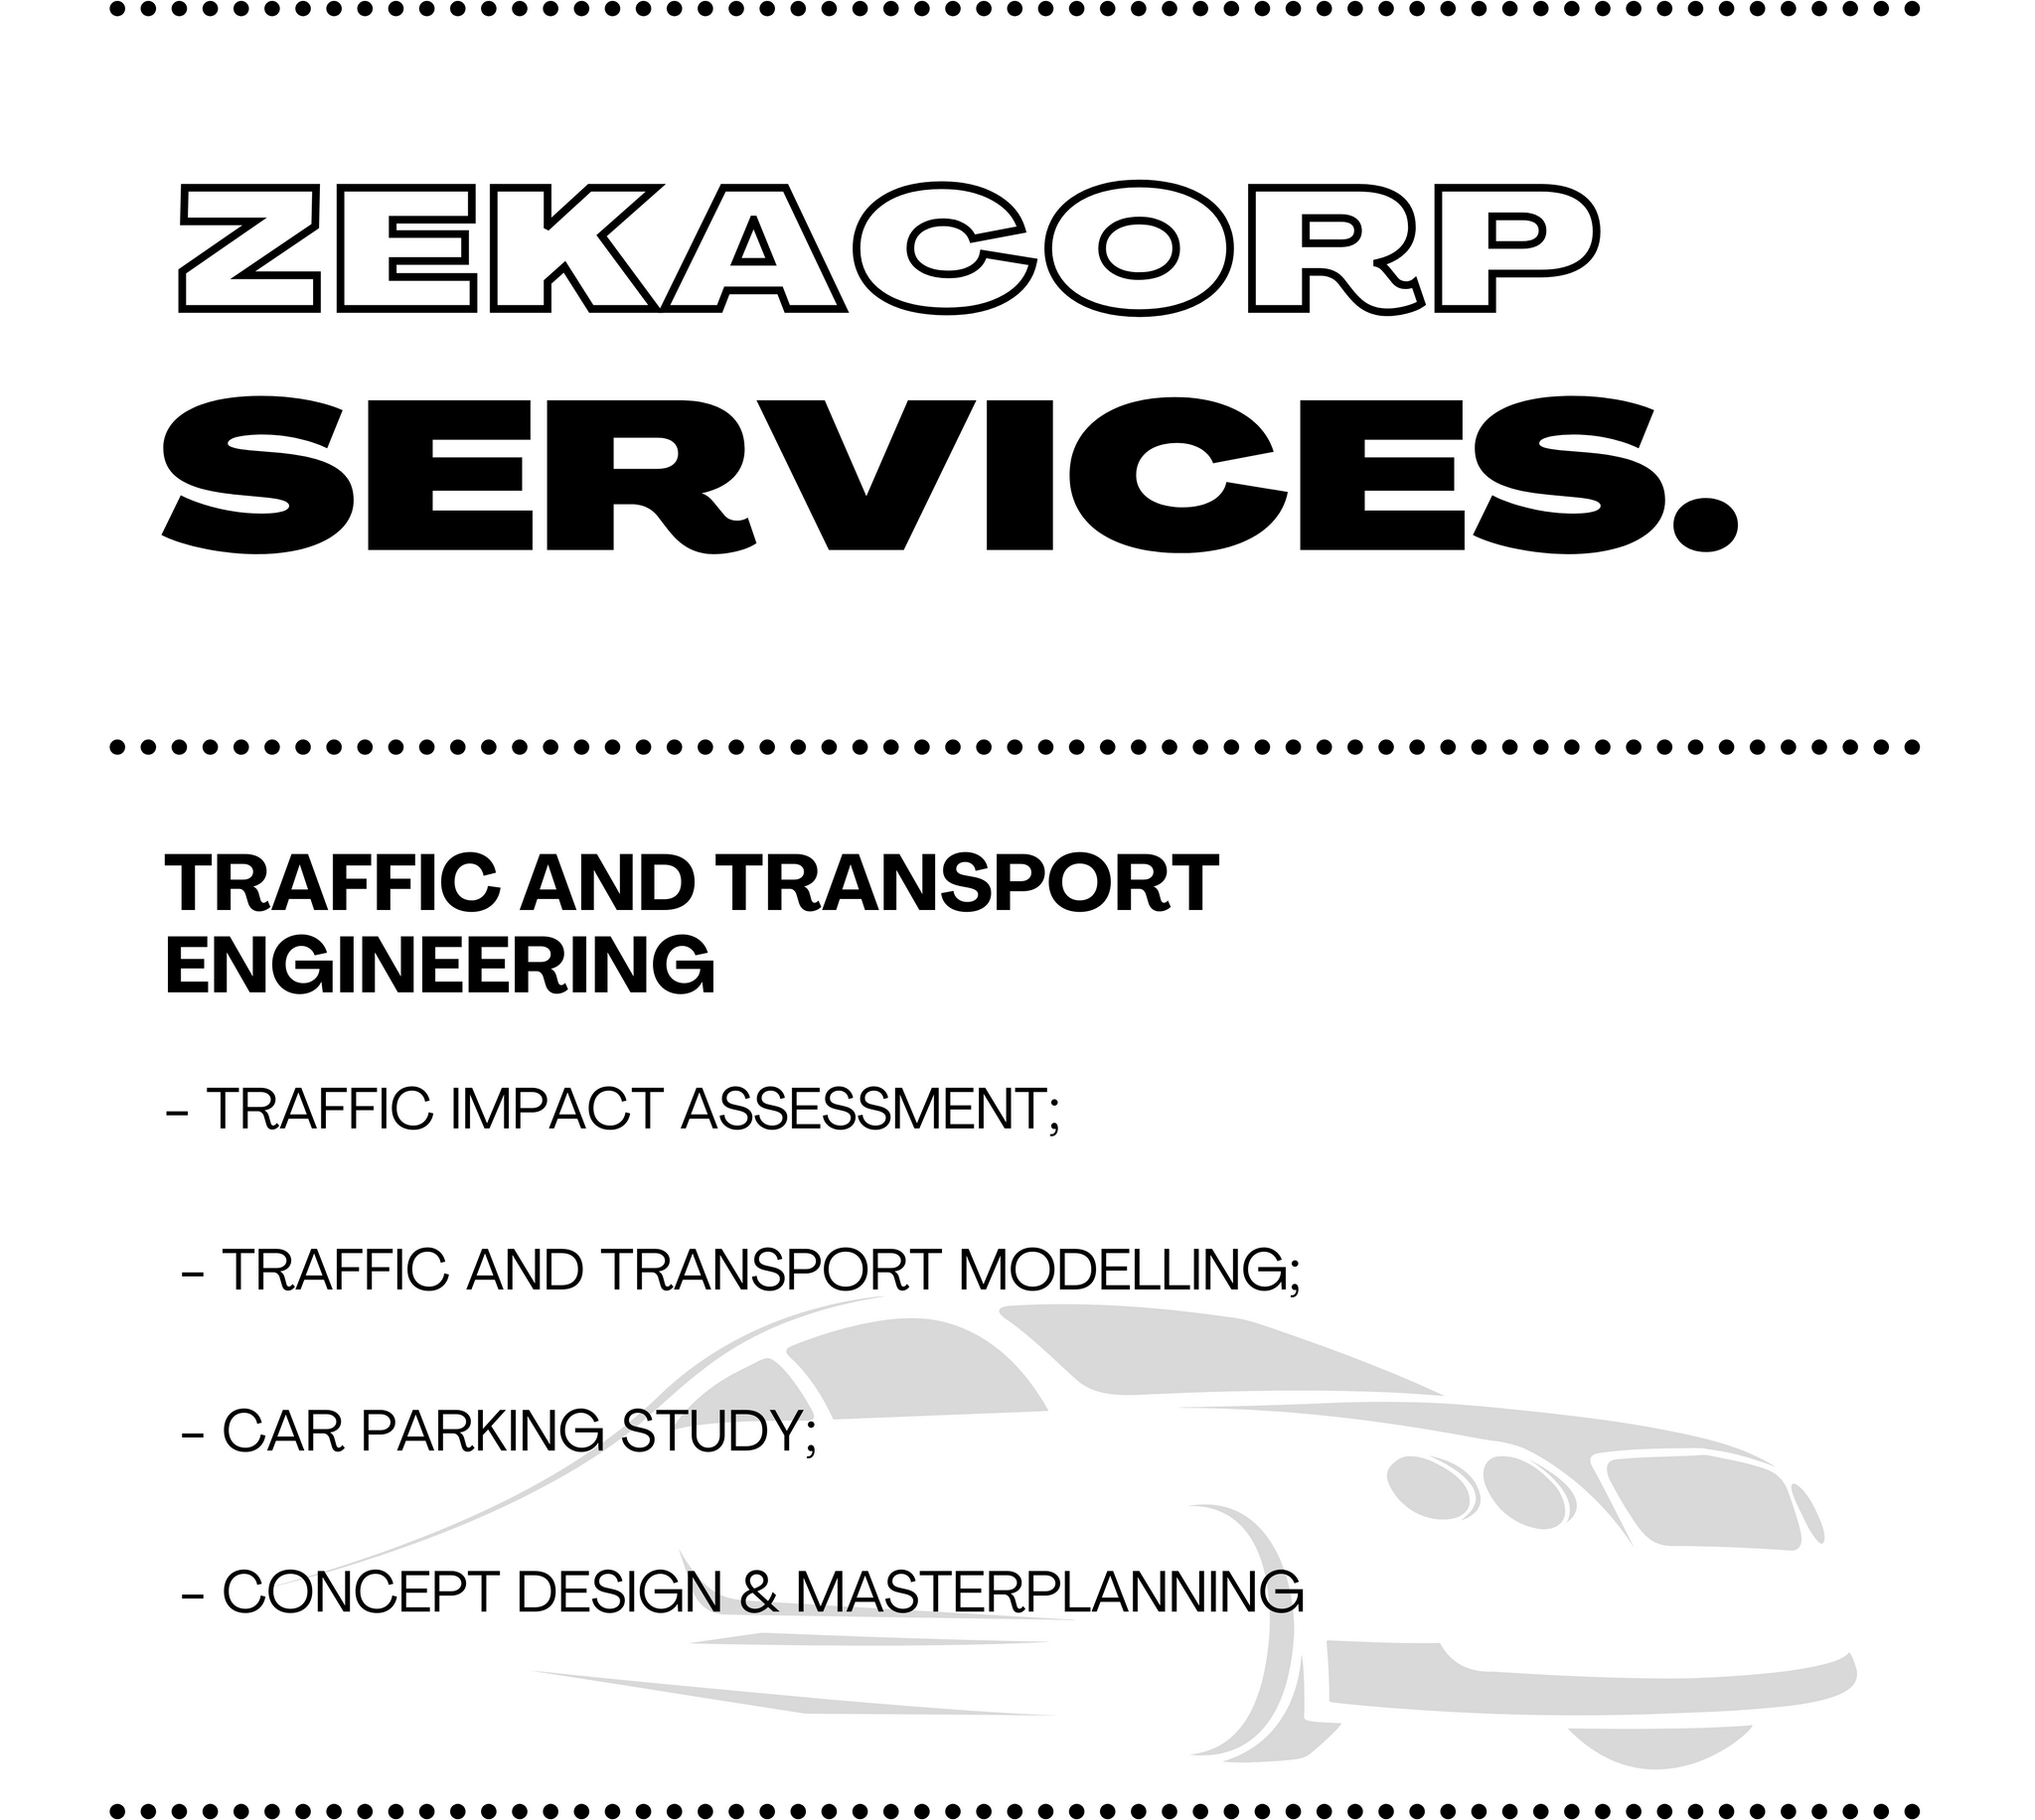 ZEKACORP SERVICES - TRAFFIC AND TRANSPORT ENGINEERING